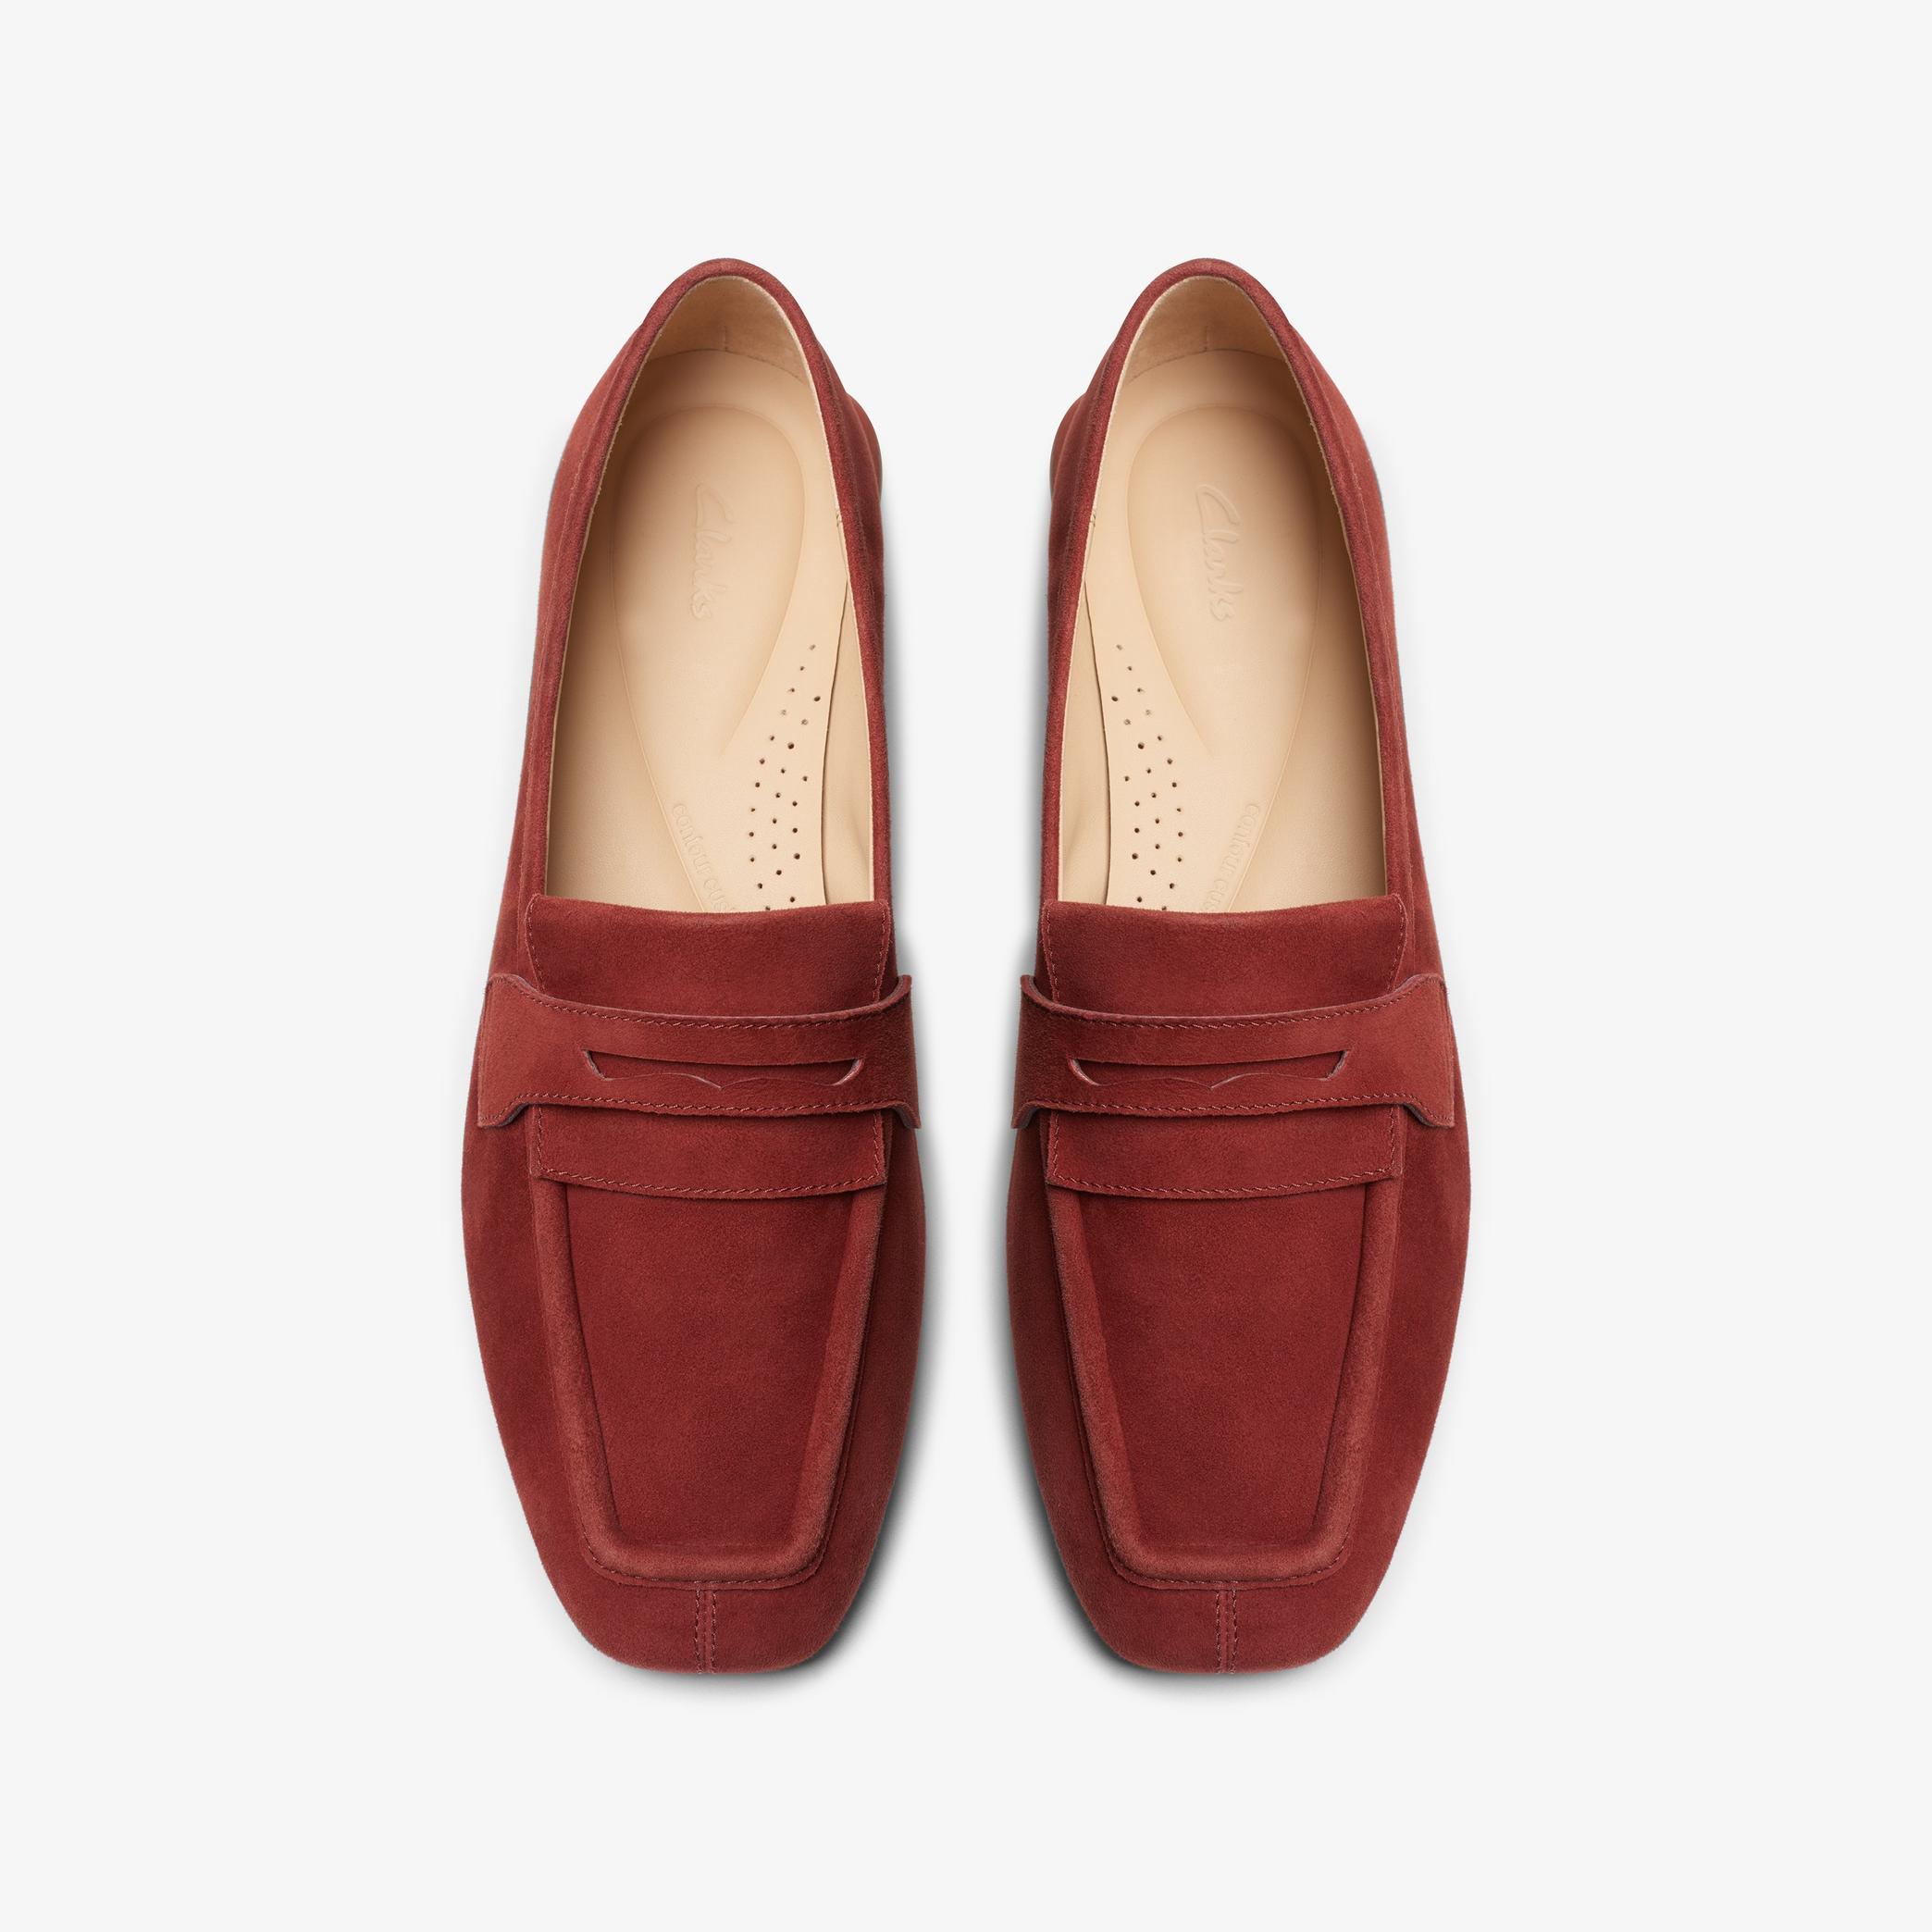 Ubree15 Surf Chestnut Suede Loafers, view 7 of 7